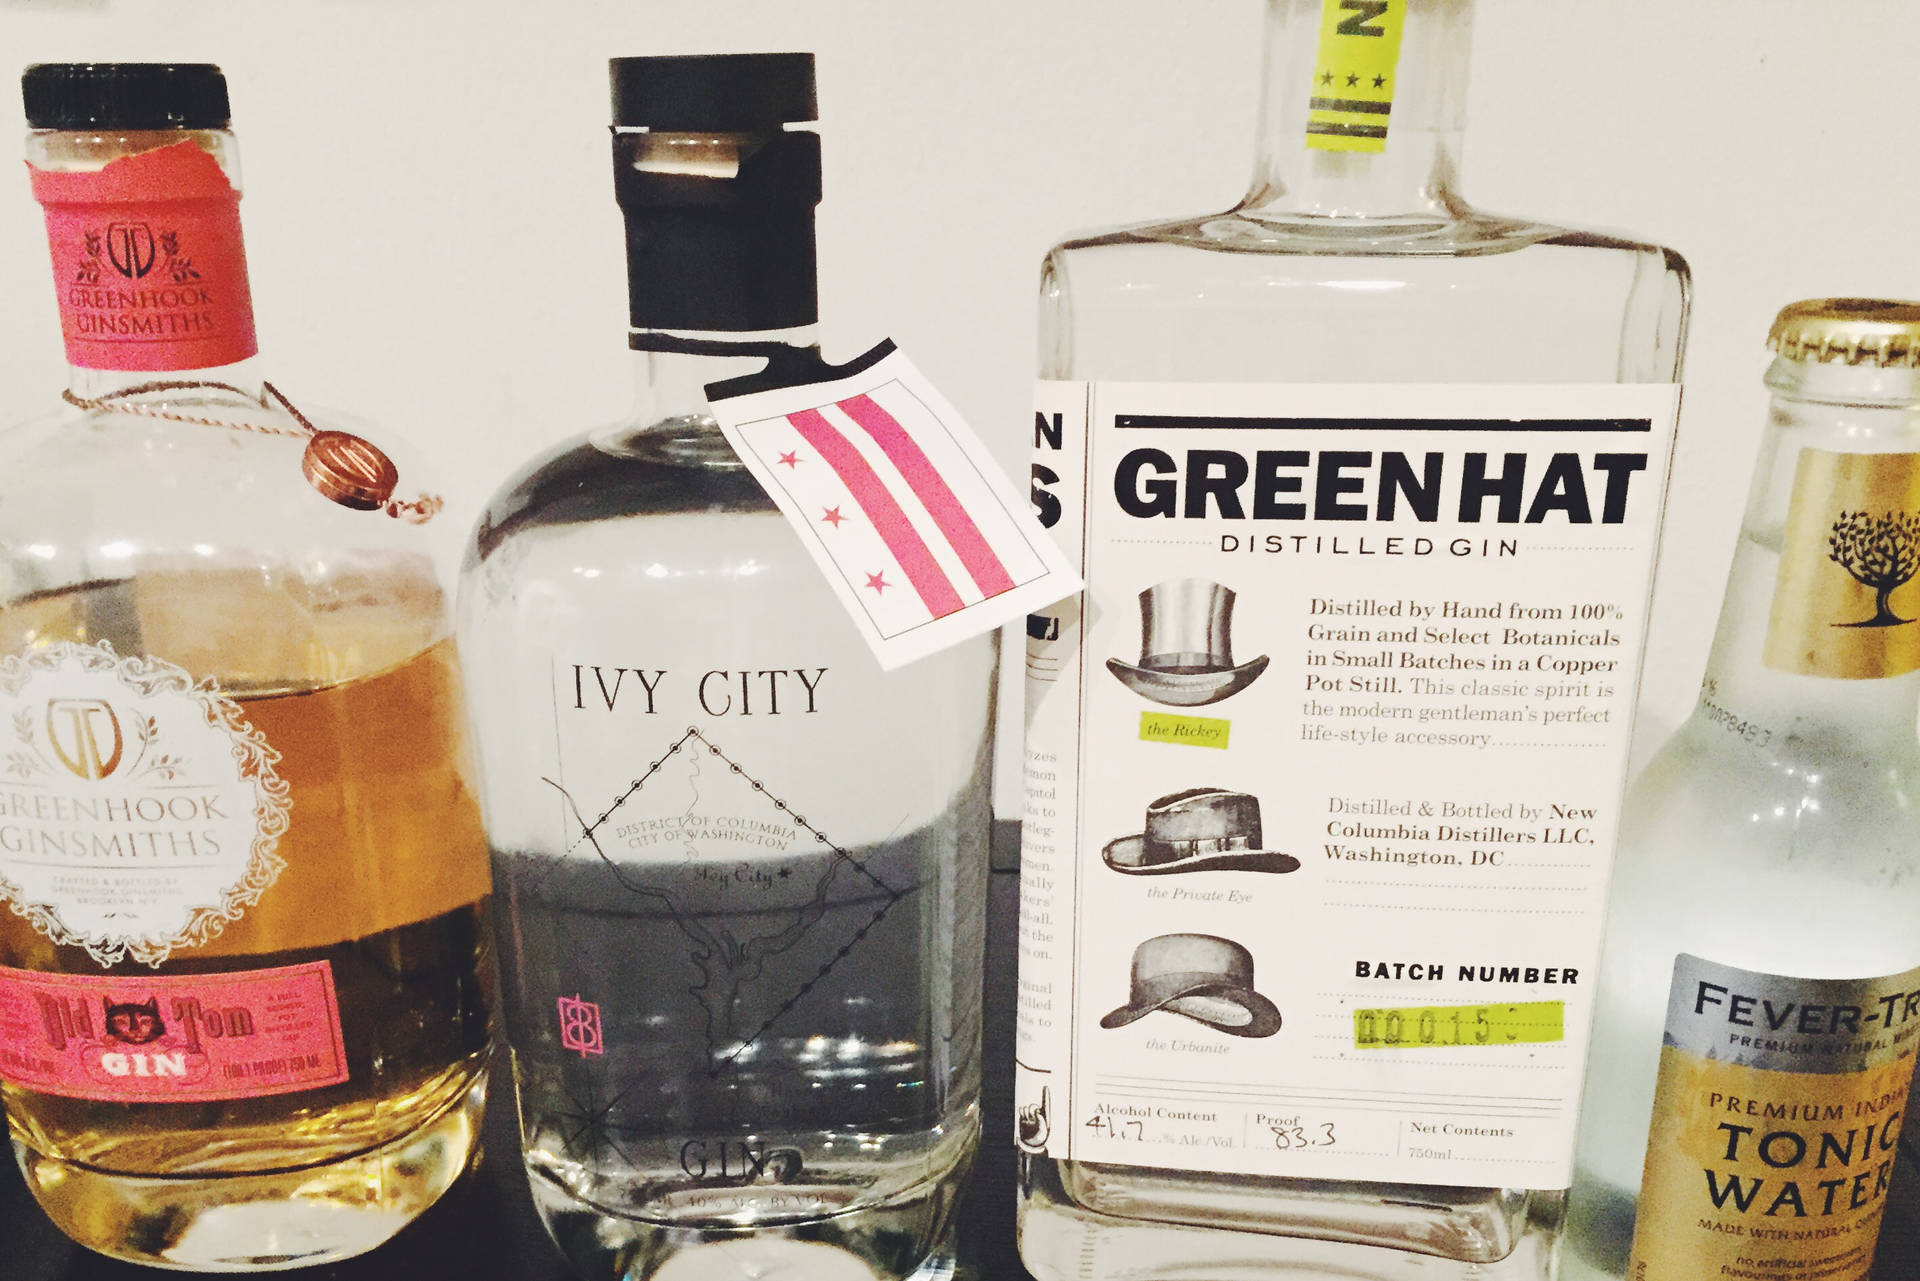 Green Hat Ivy City Old Tom Fever Tree Tonic Picture